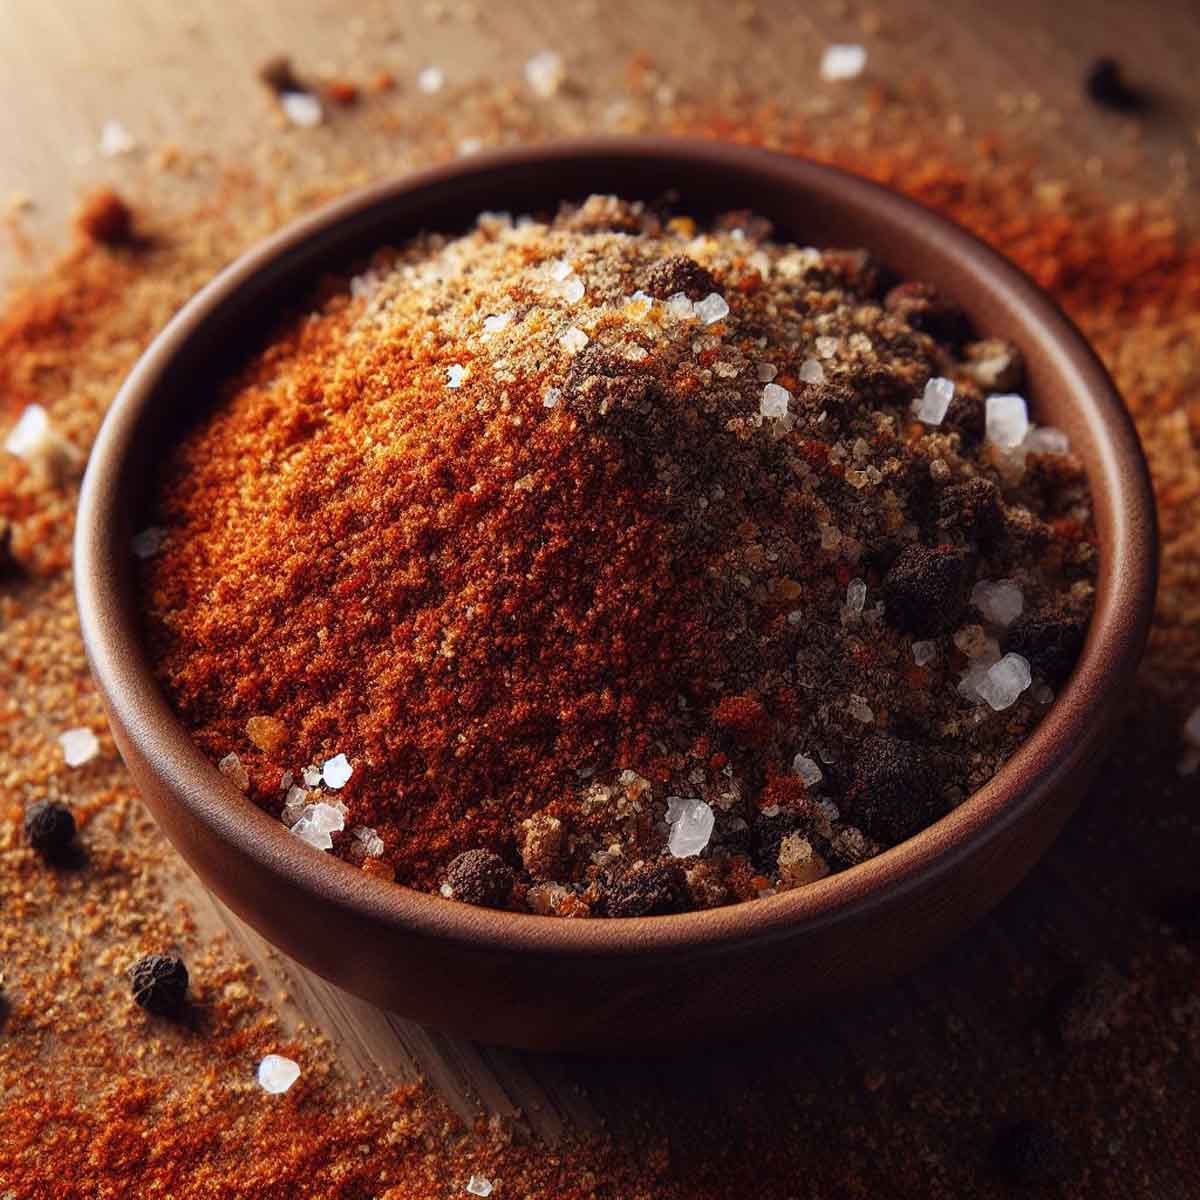 A bowl filled with a homemade dry rub mixture, showcasing layers of brown sugar, paprika, and spices.